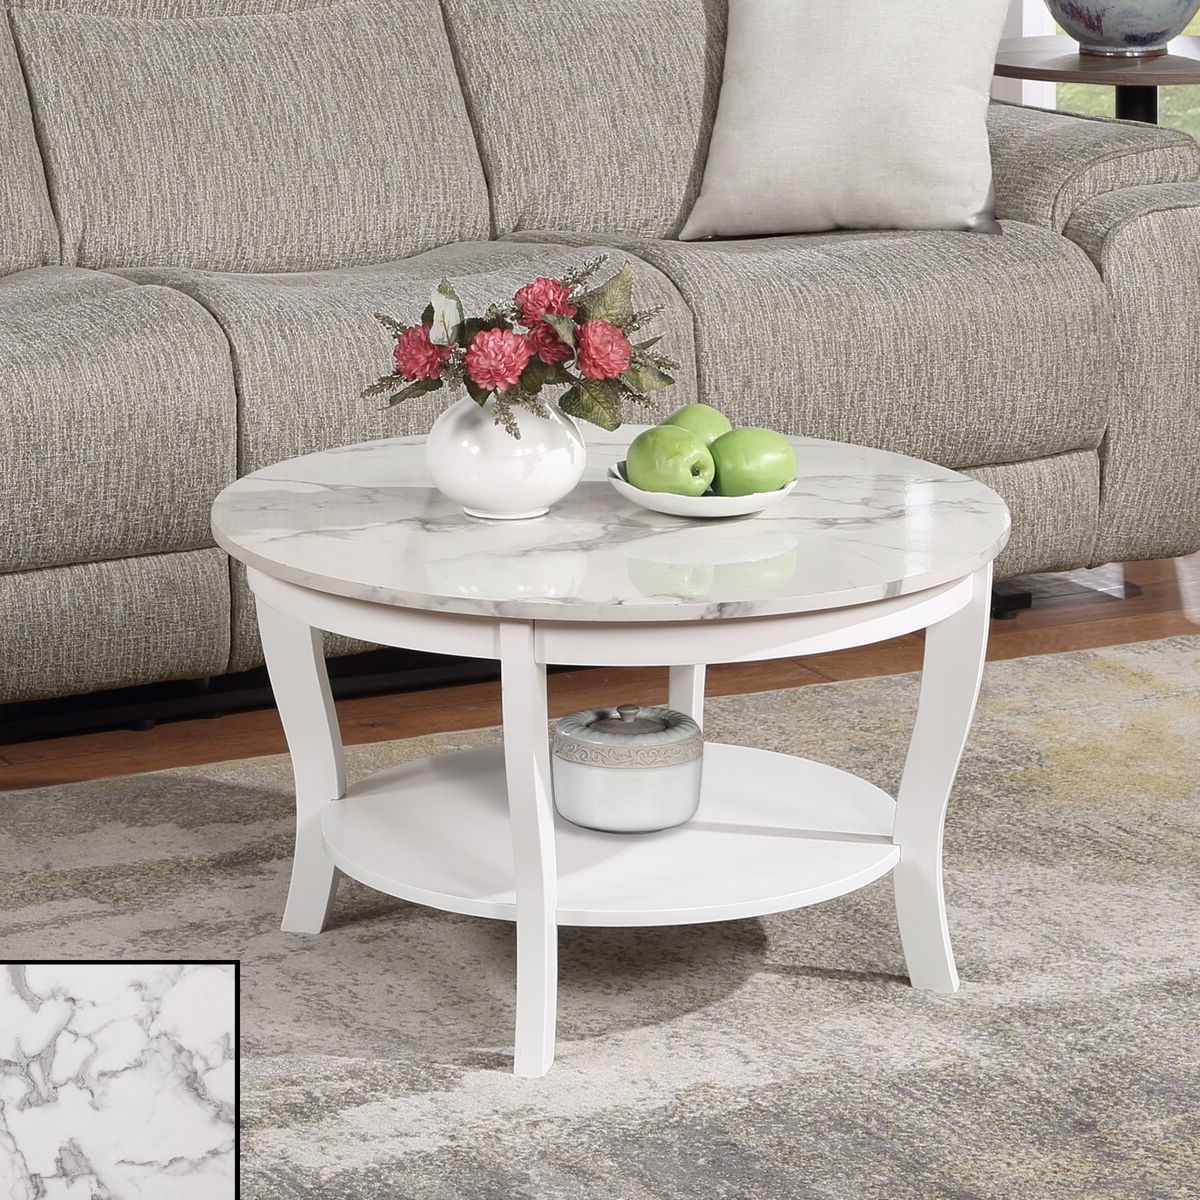 Ebay In Popular American Heritage Round Coffee Tables (View 9 of 10)